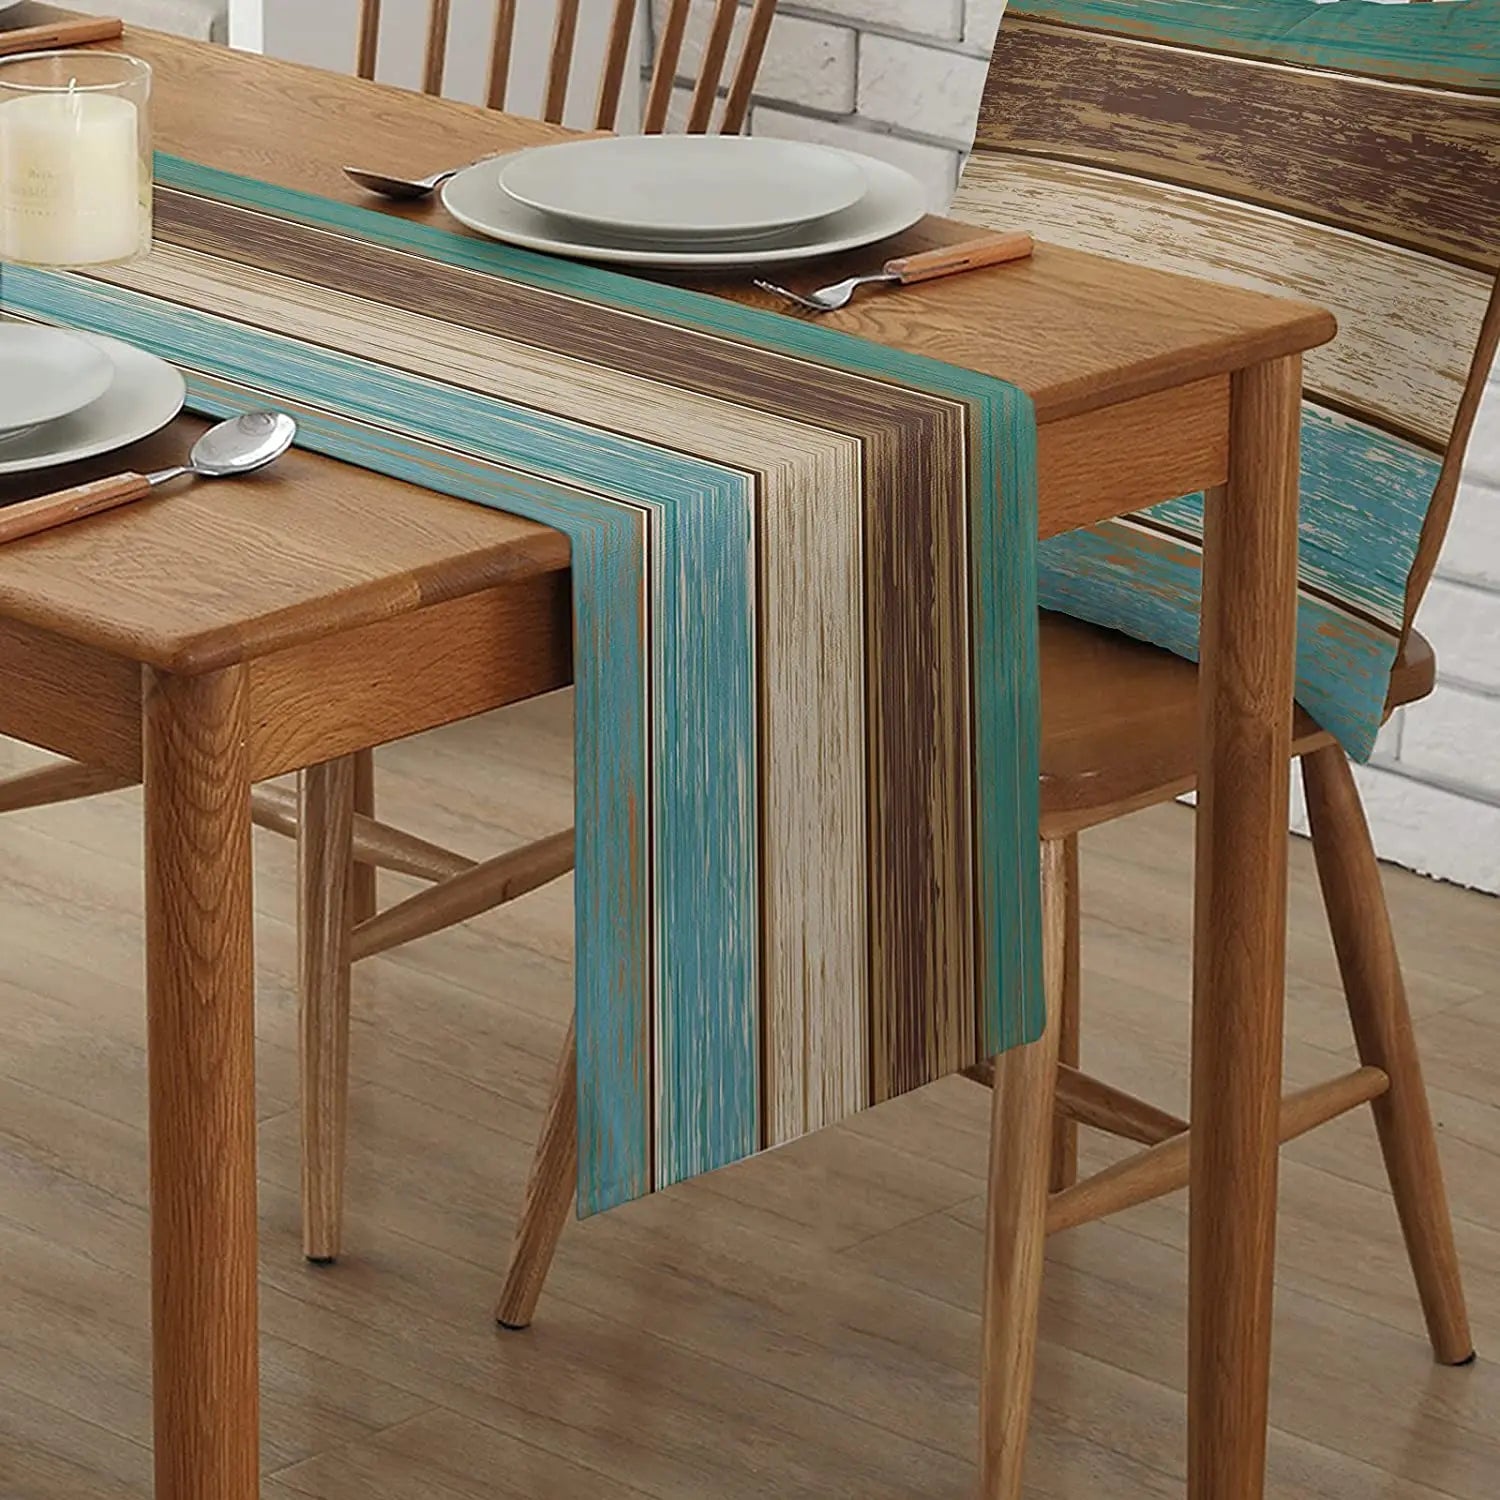 Turquoise Blue Green Wood Striped Linen Table Runners Dresser Scarves